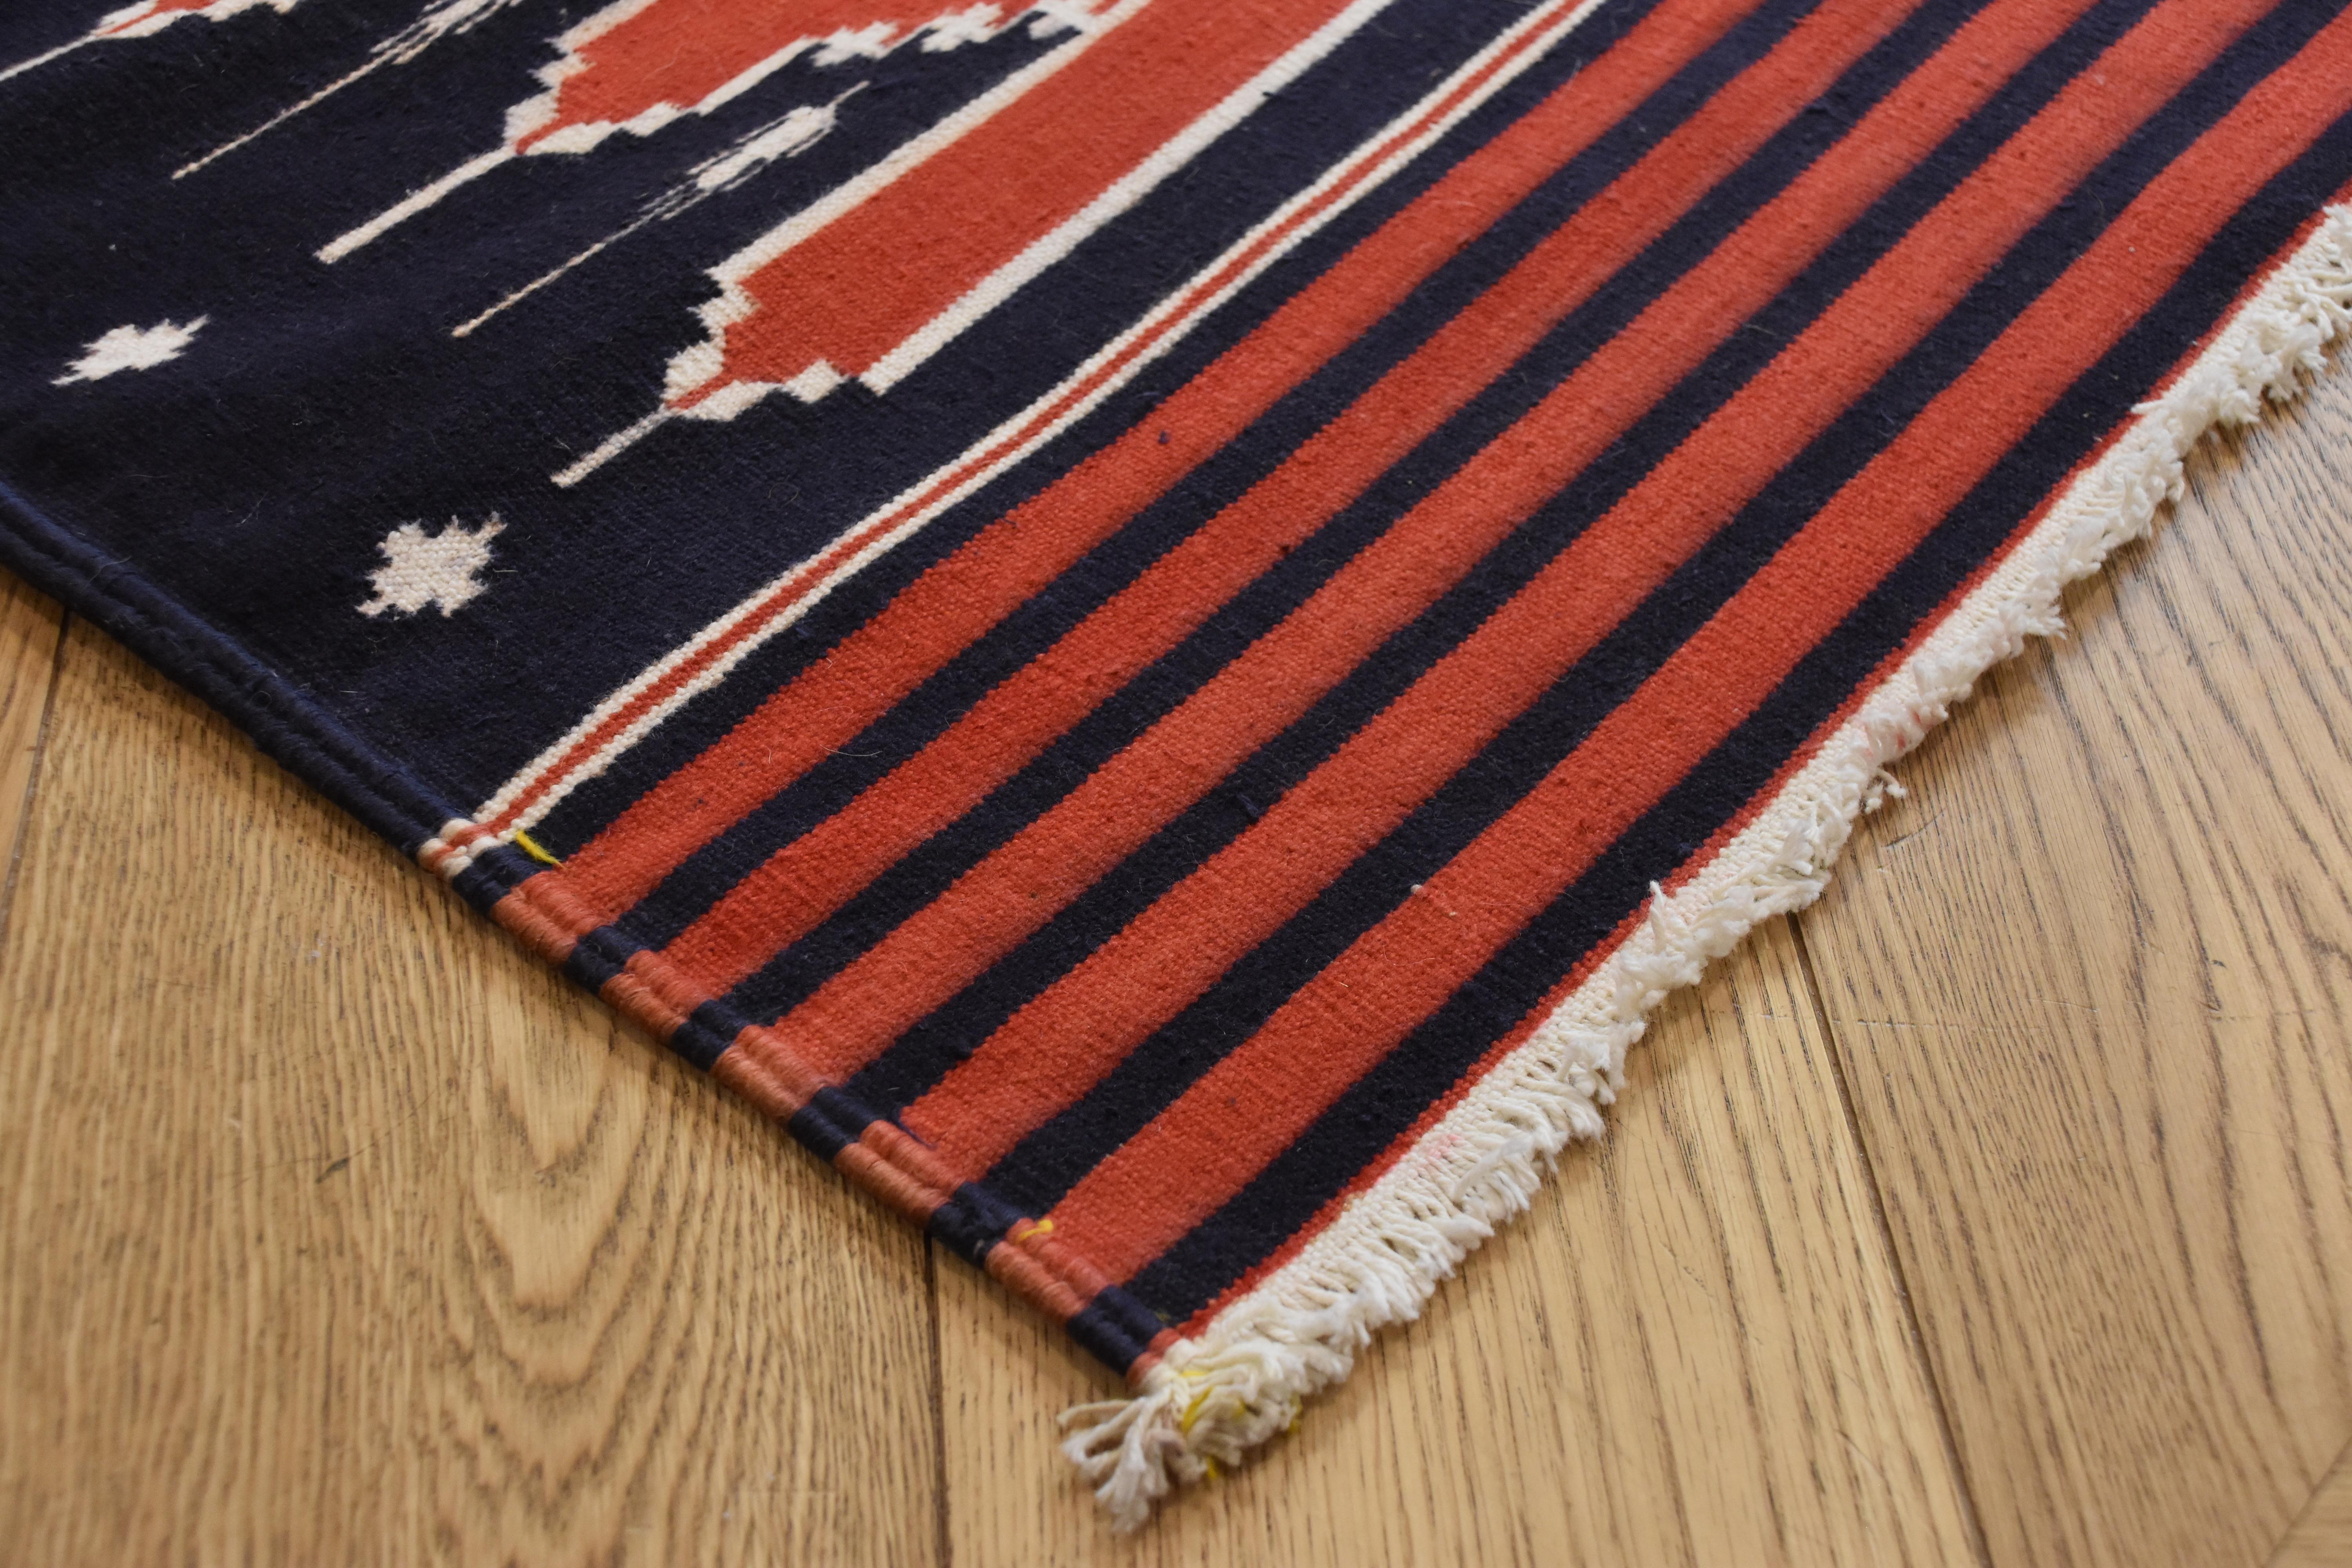 20th Century Red, White and Blue Dhurrie Saf Runner Mehrab Rug from India, 1970s For Sale 3